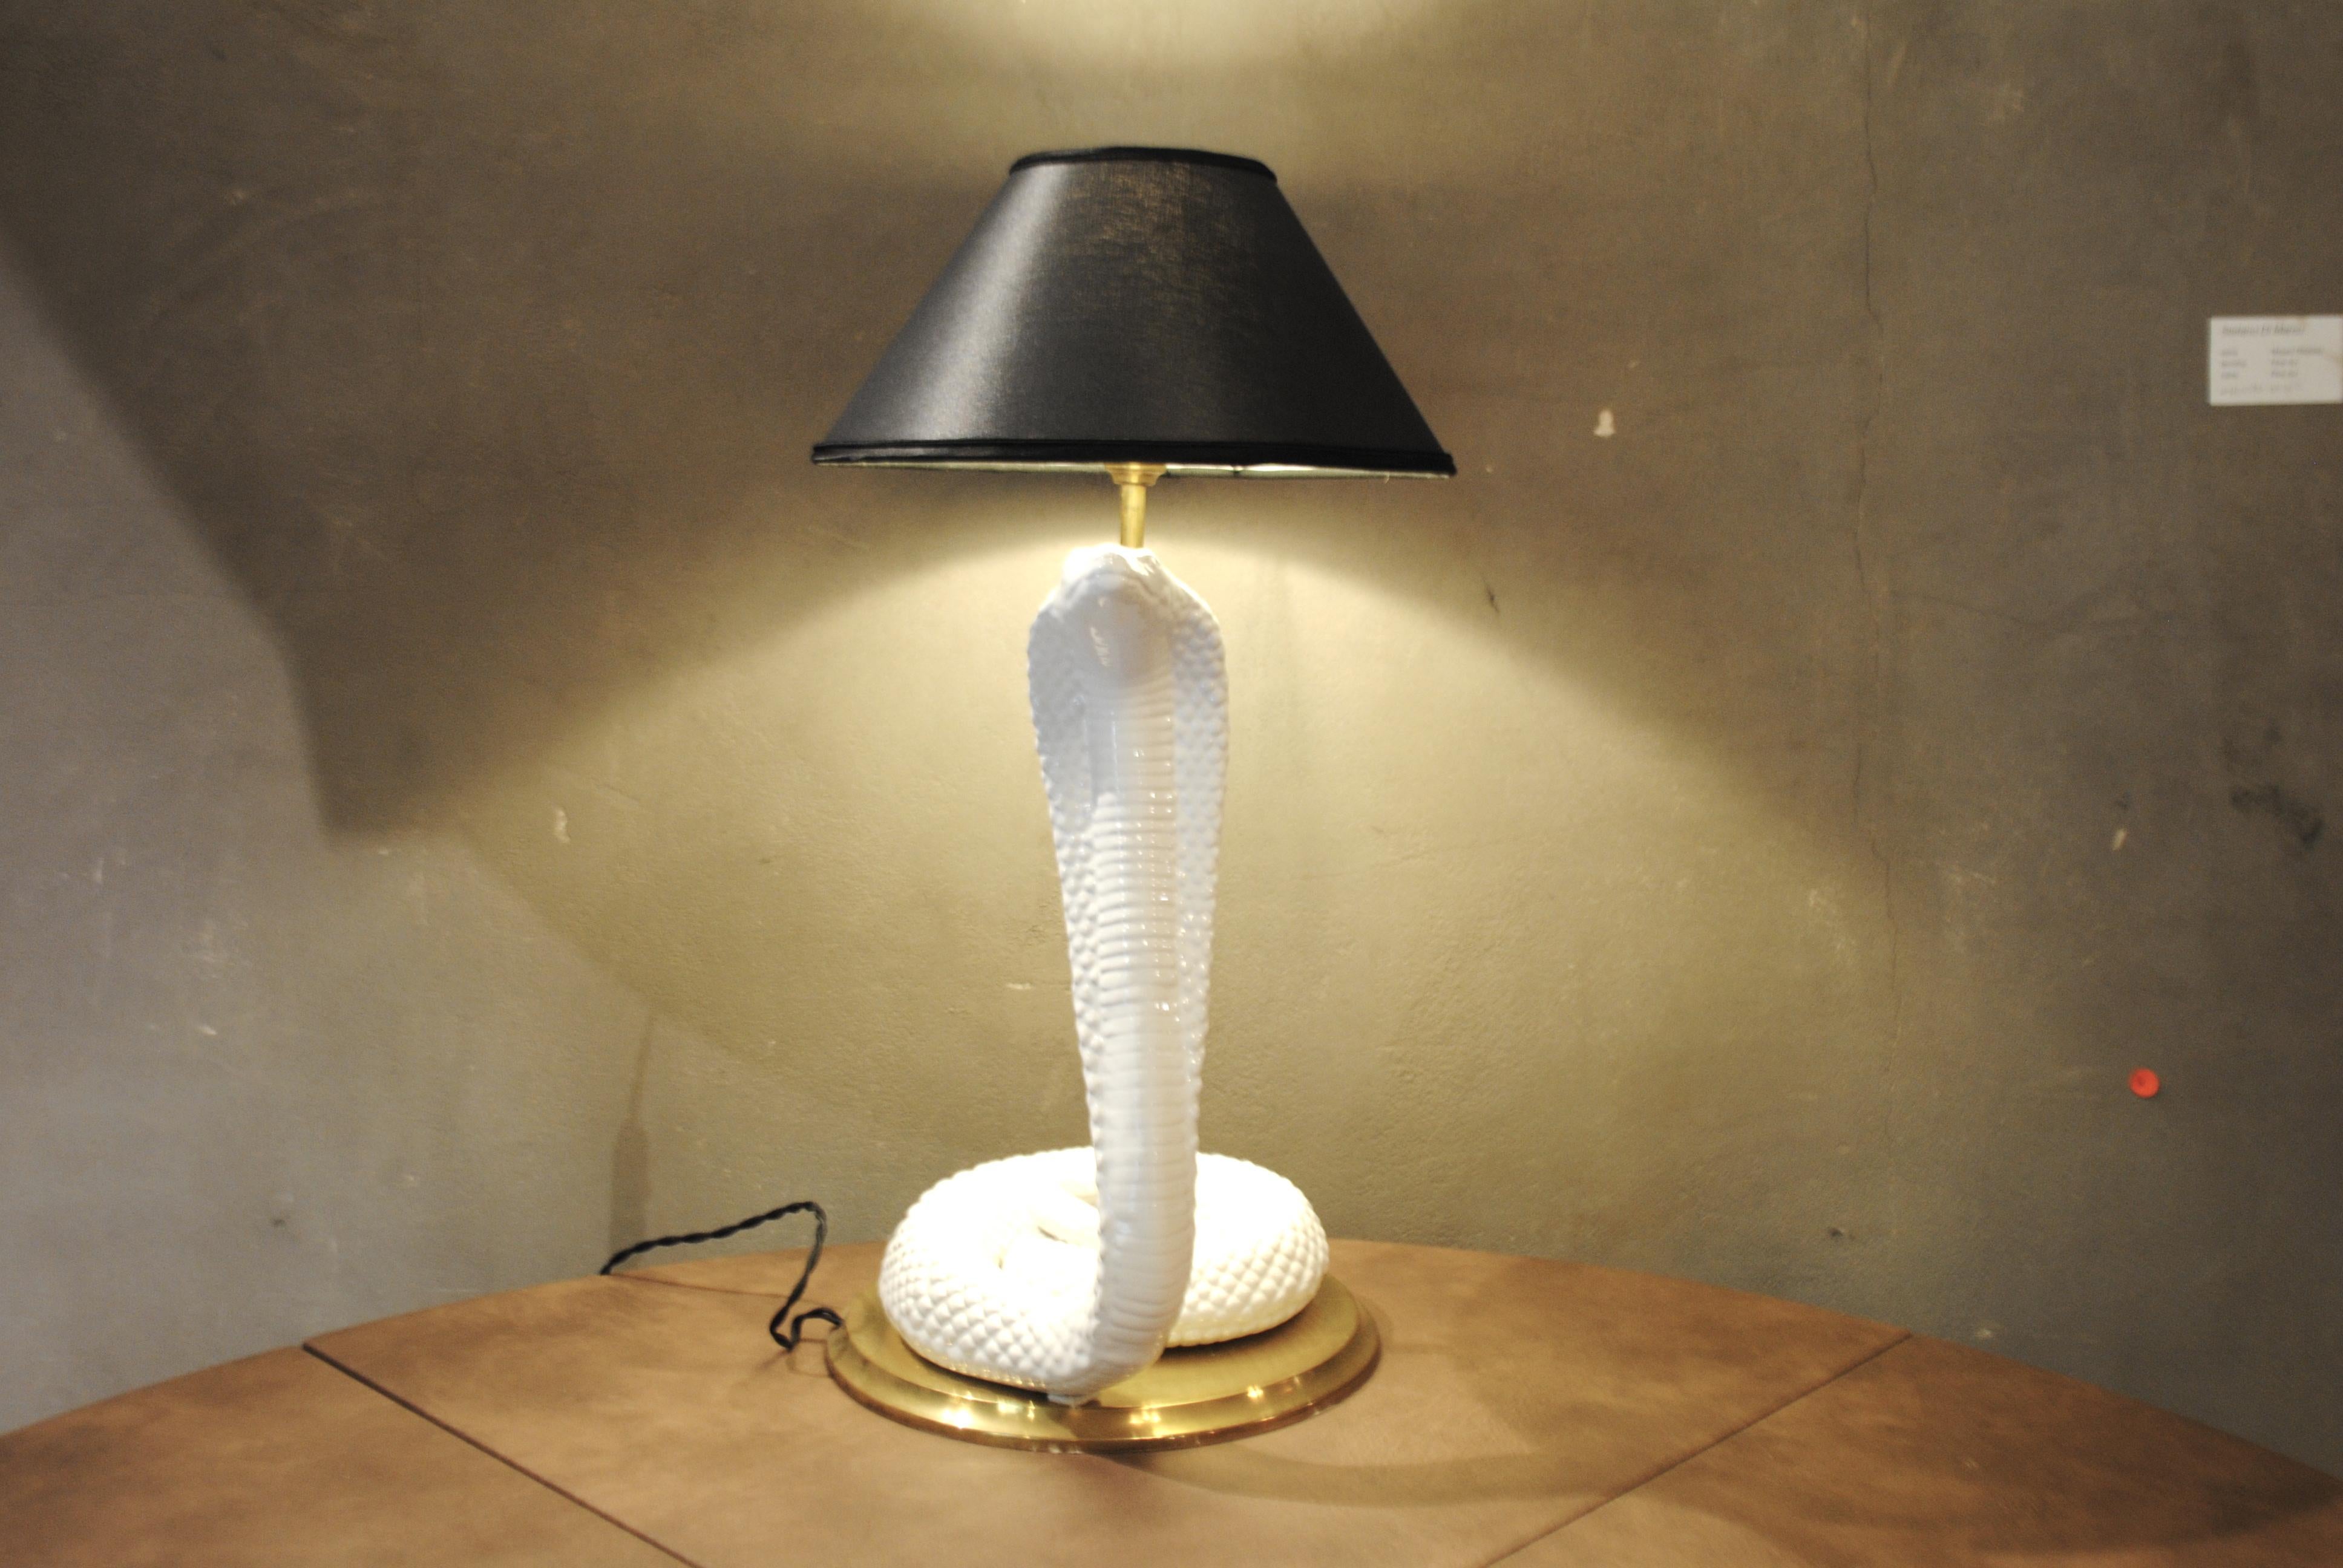 Table lamp in ceramic and brass a cobra refining, by the Italian designer Tommaso Barbi.